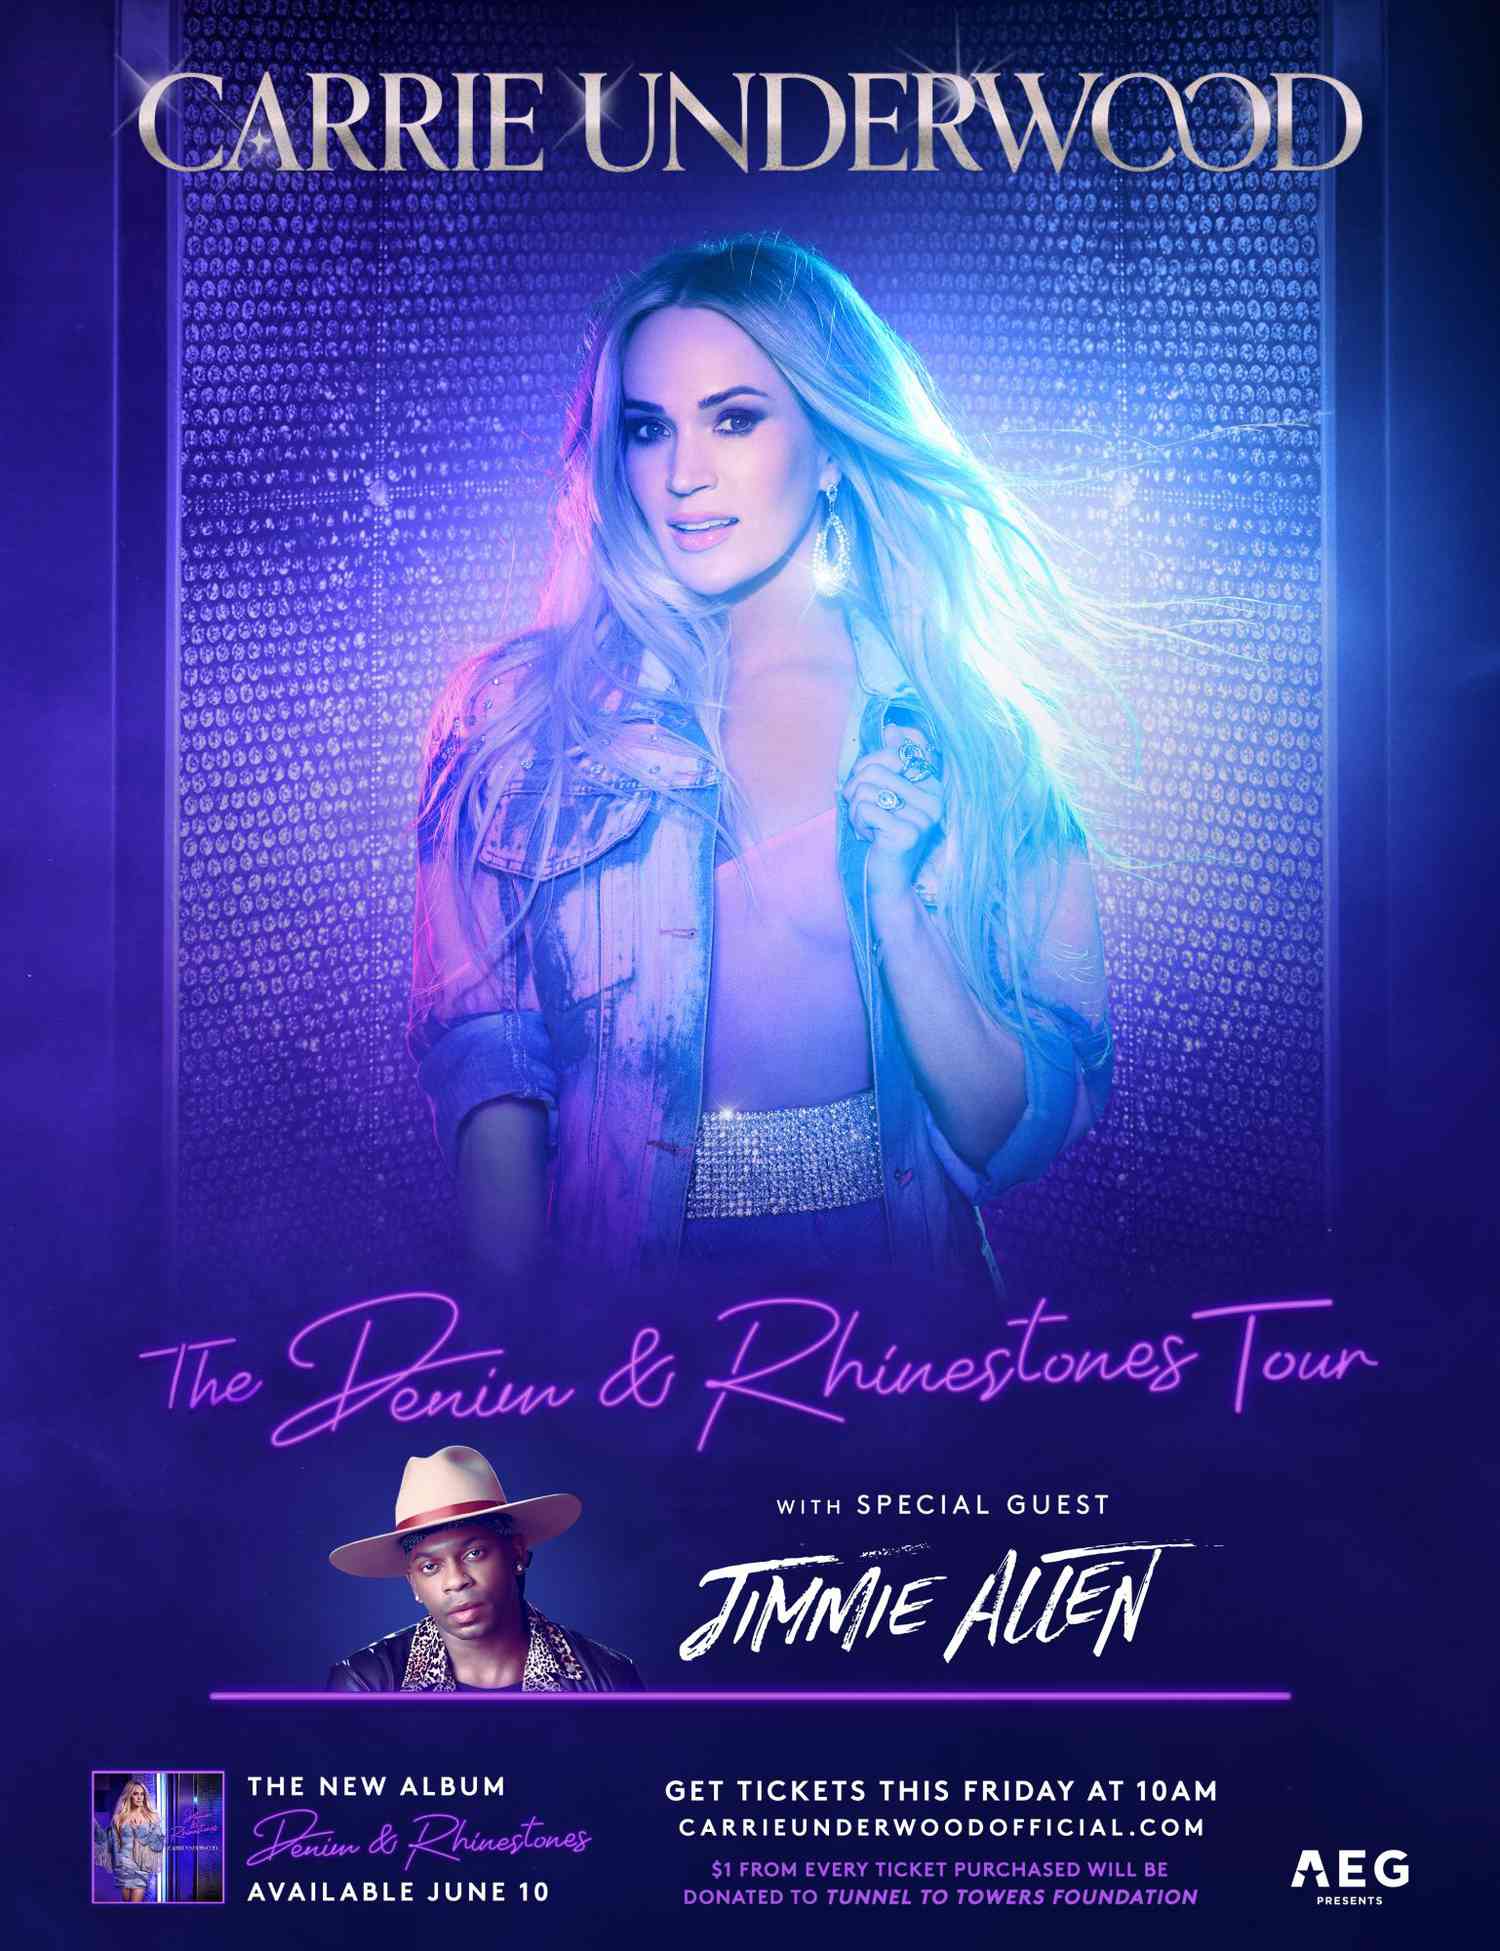 CARRIE UNDERWOOD ANNOUNCES RETURN TO THE ROAD WITH “THE DENIM & RHINESTONES TOUR”